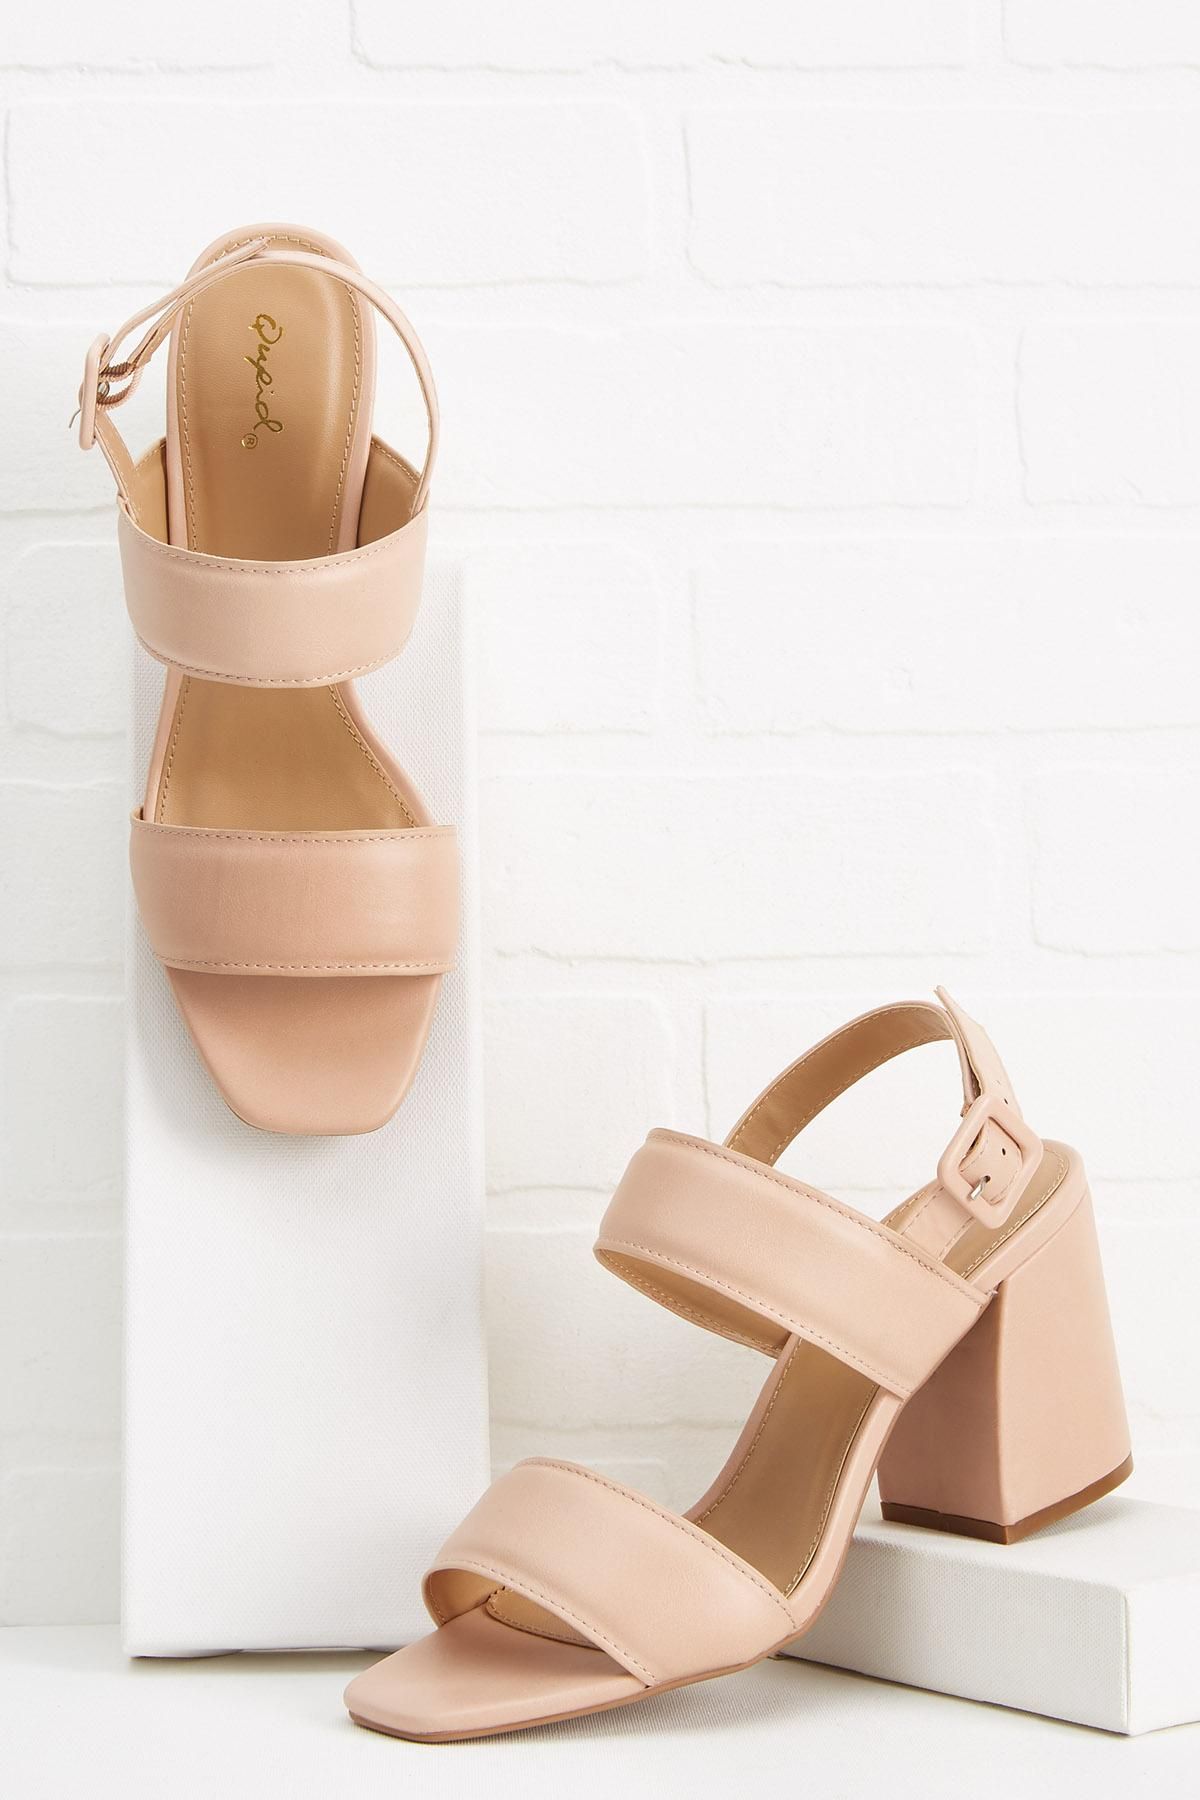 rise up nude sandals | Versona